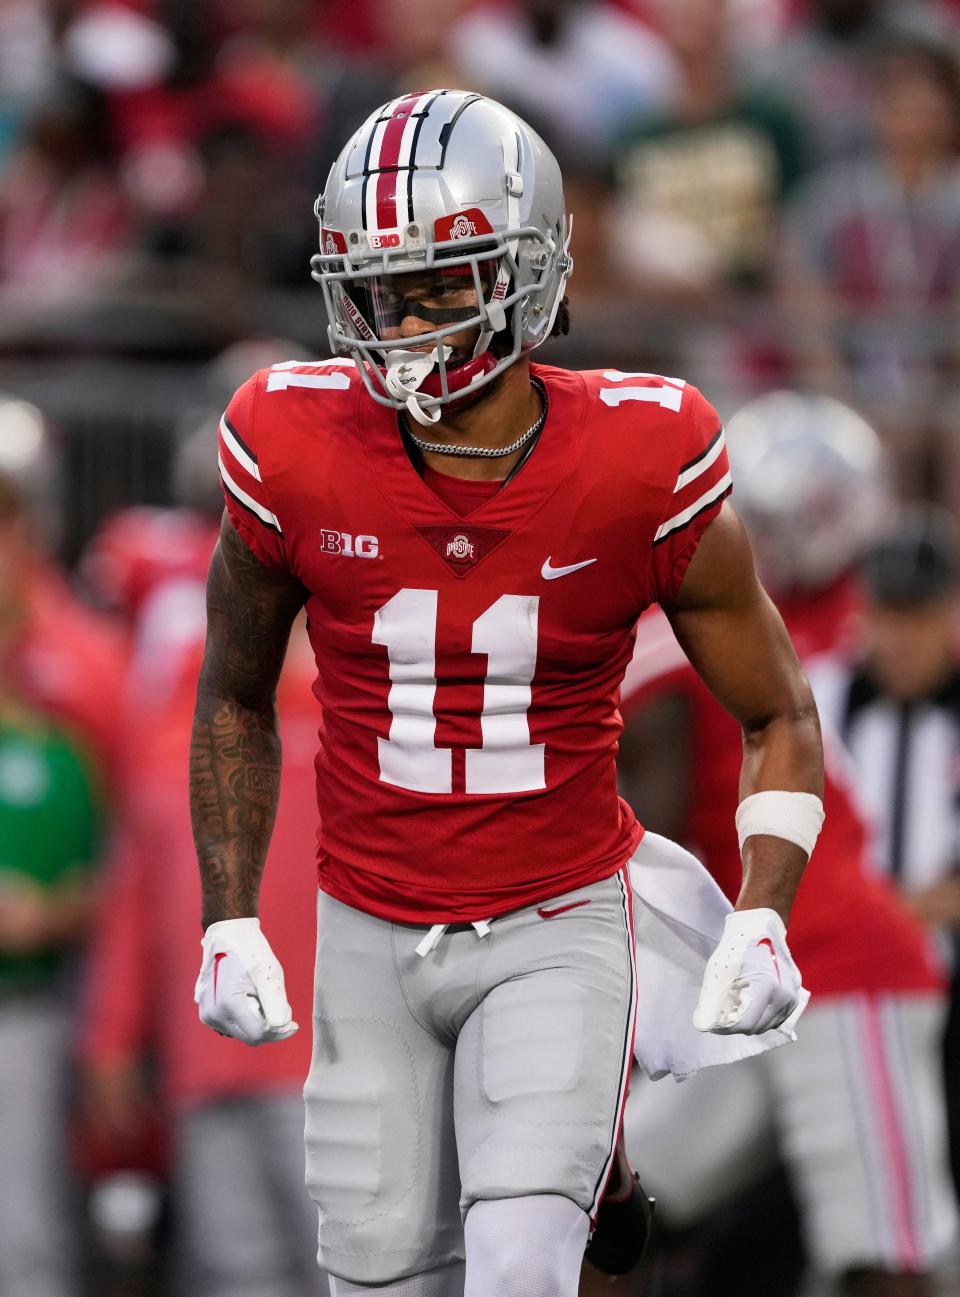 Receiver Jaxon Smith-Njigba (Ohio State) could be a target for teams in the first round.